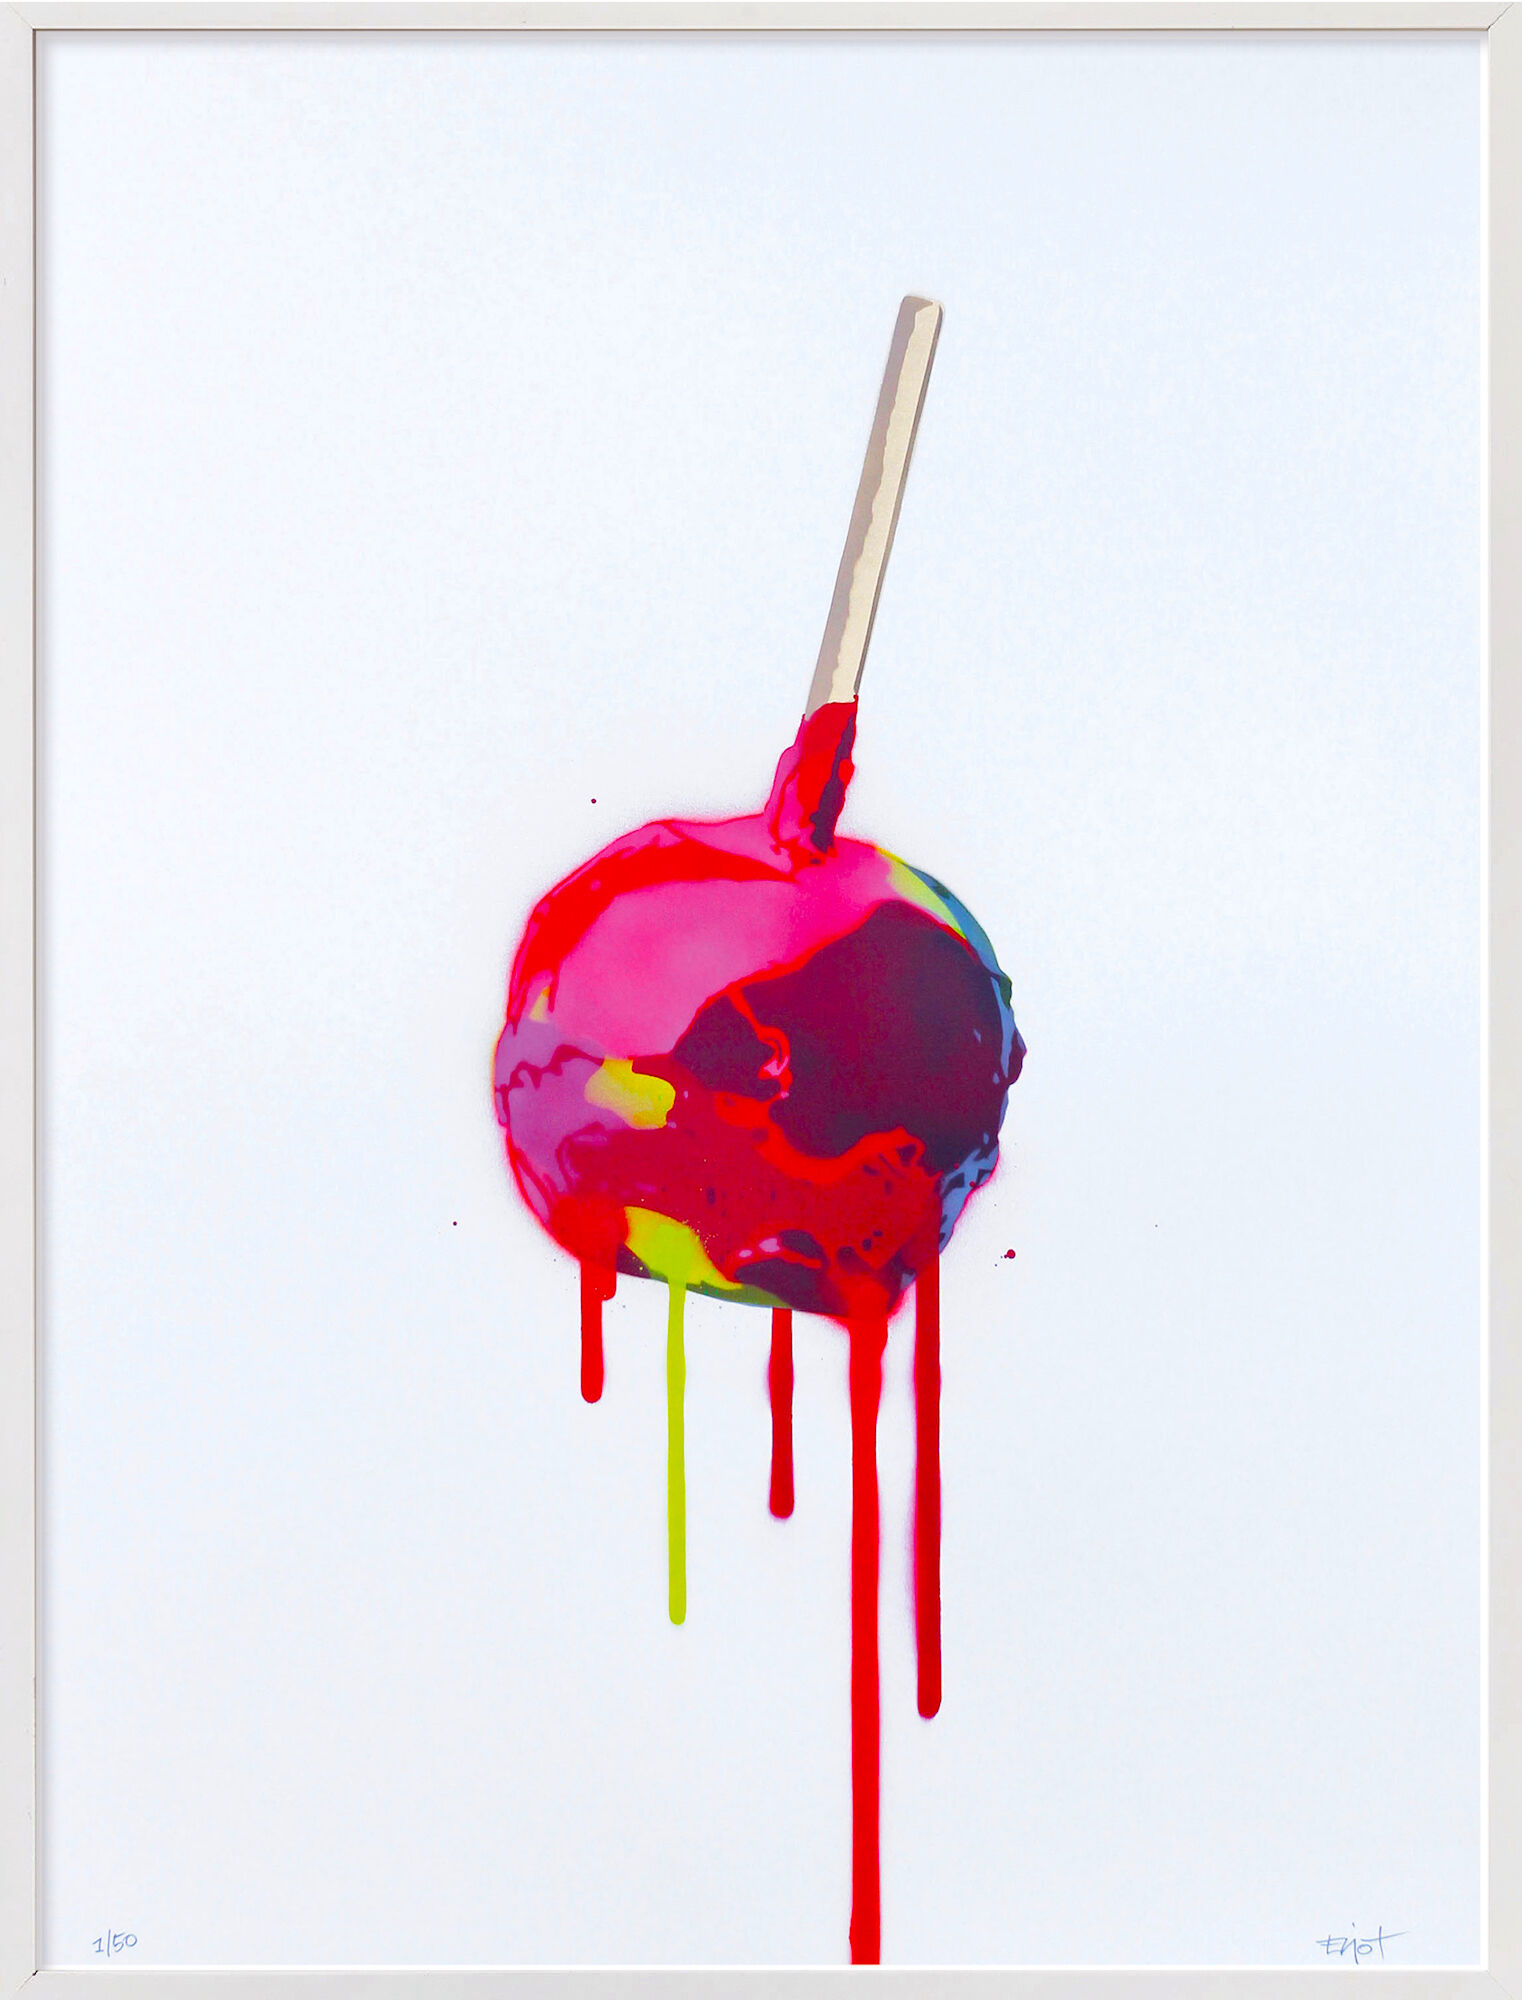 Picture "Candy Apple" (2020) by ELIOT theSuper